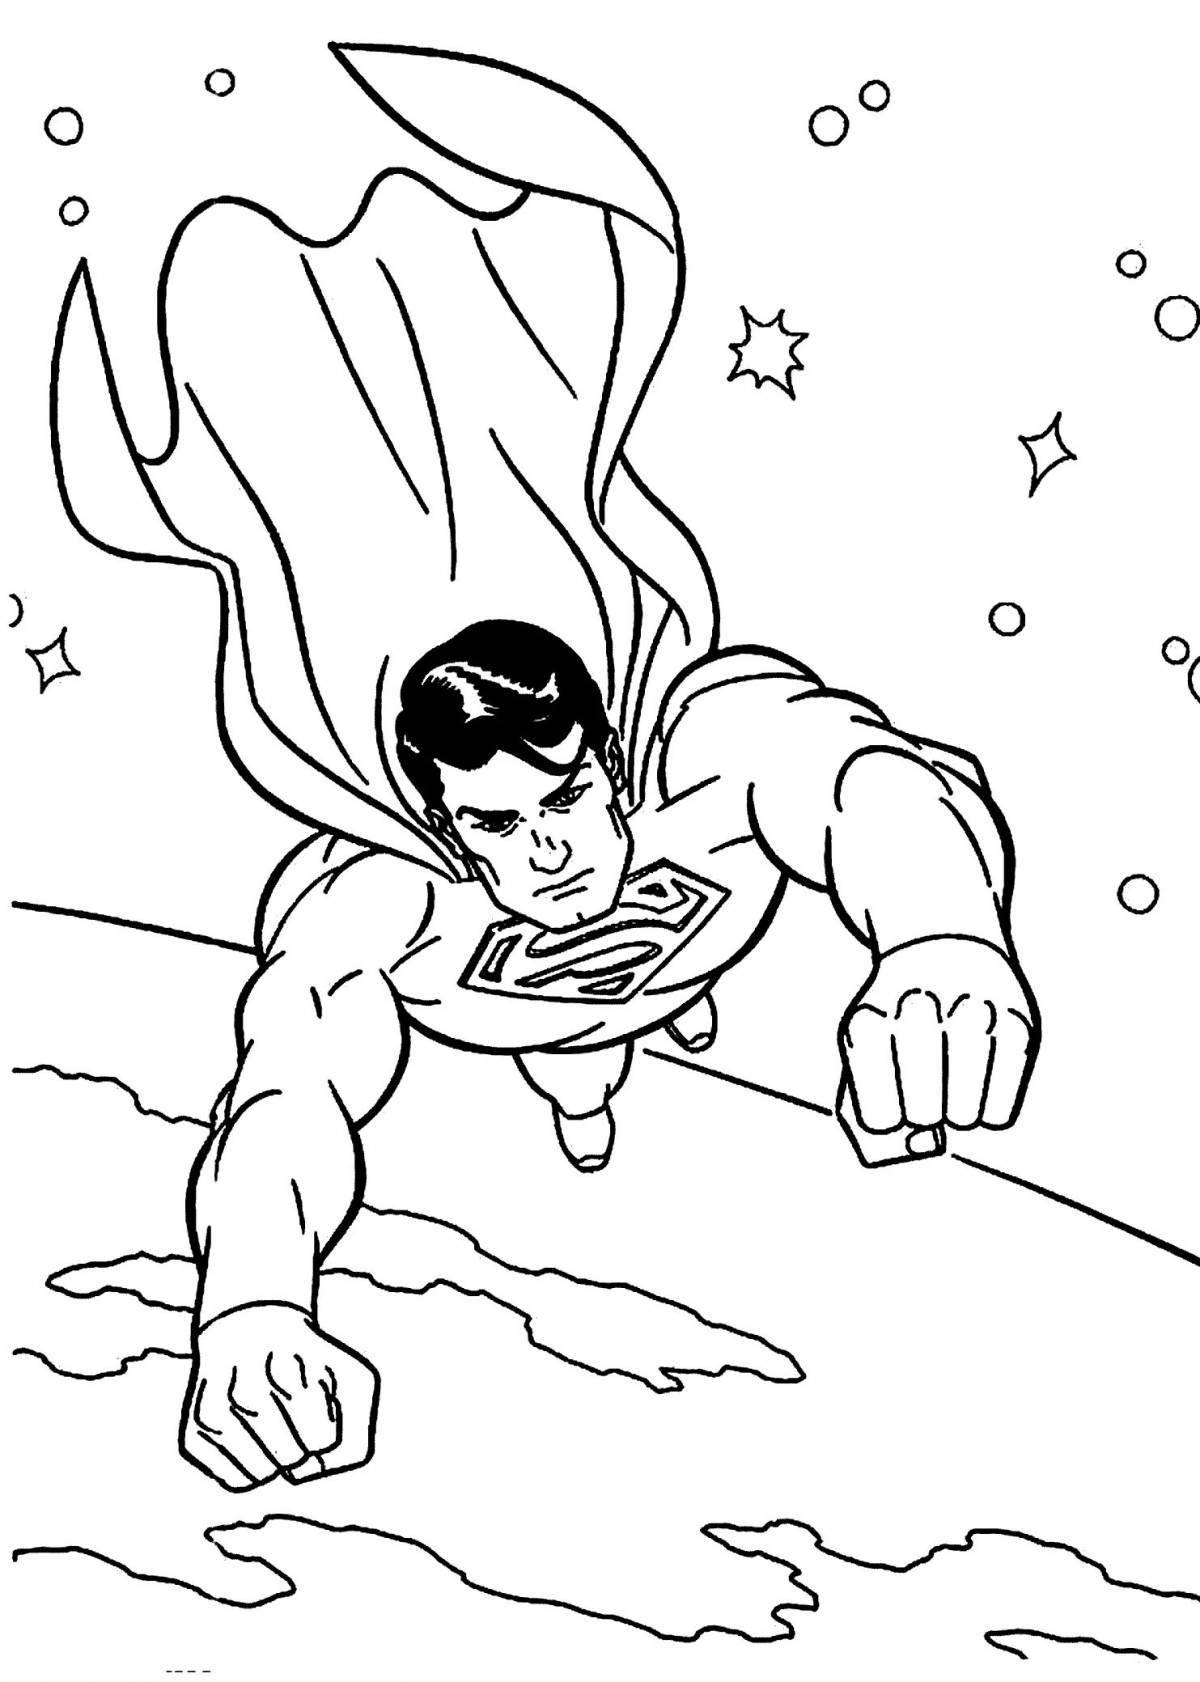 Colorful superhero coloring book for 4-5 year olds